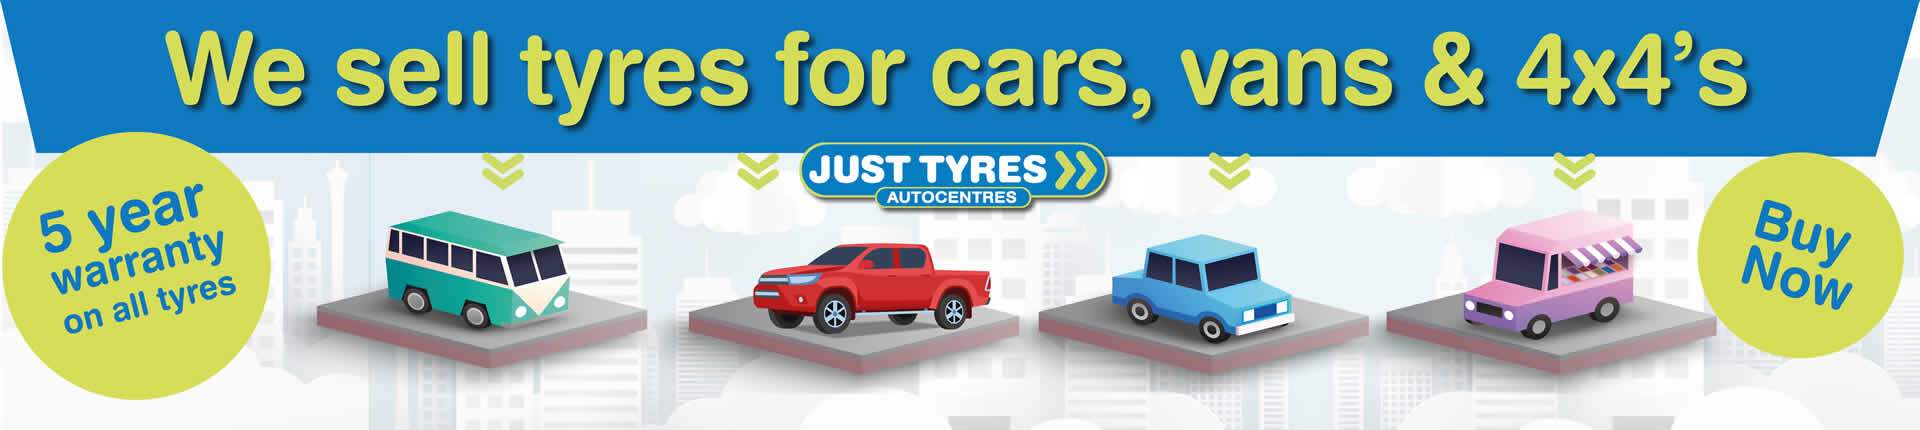 Types of tyres